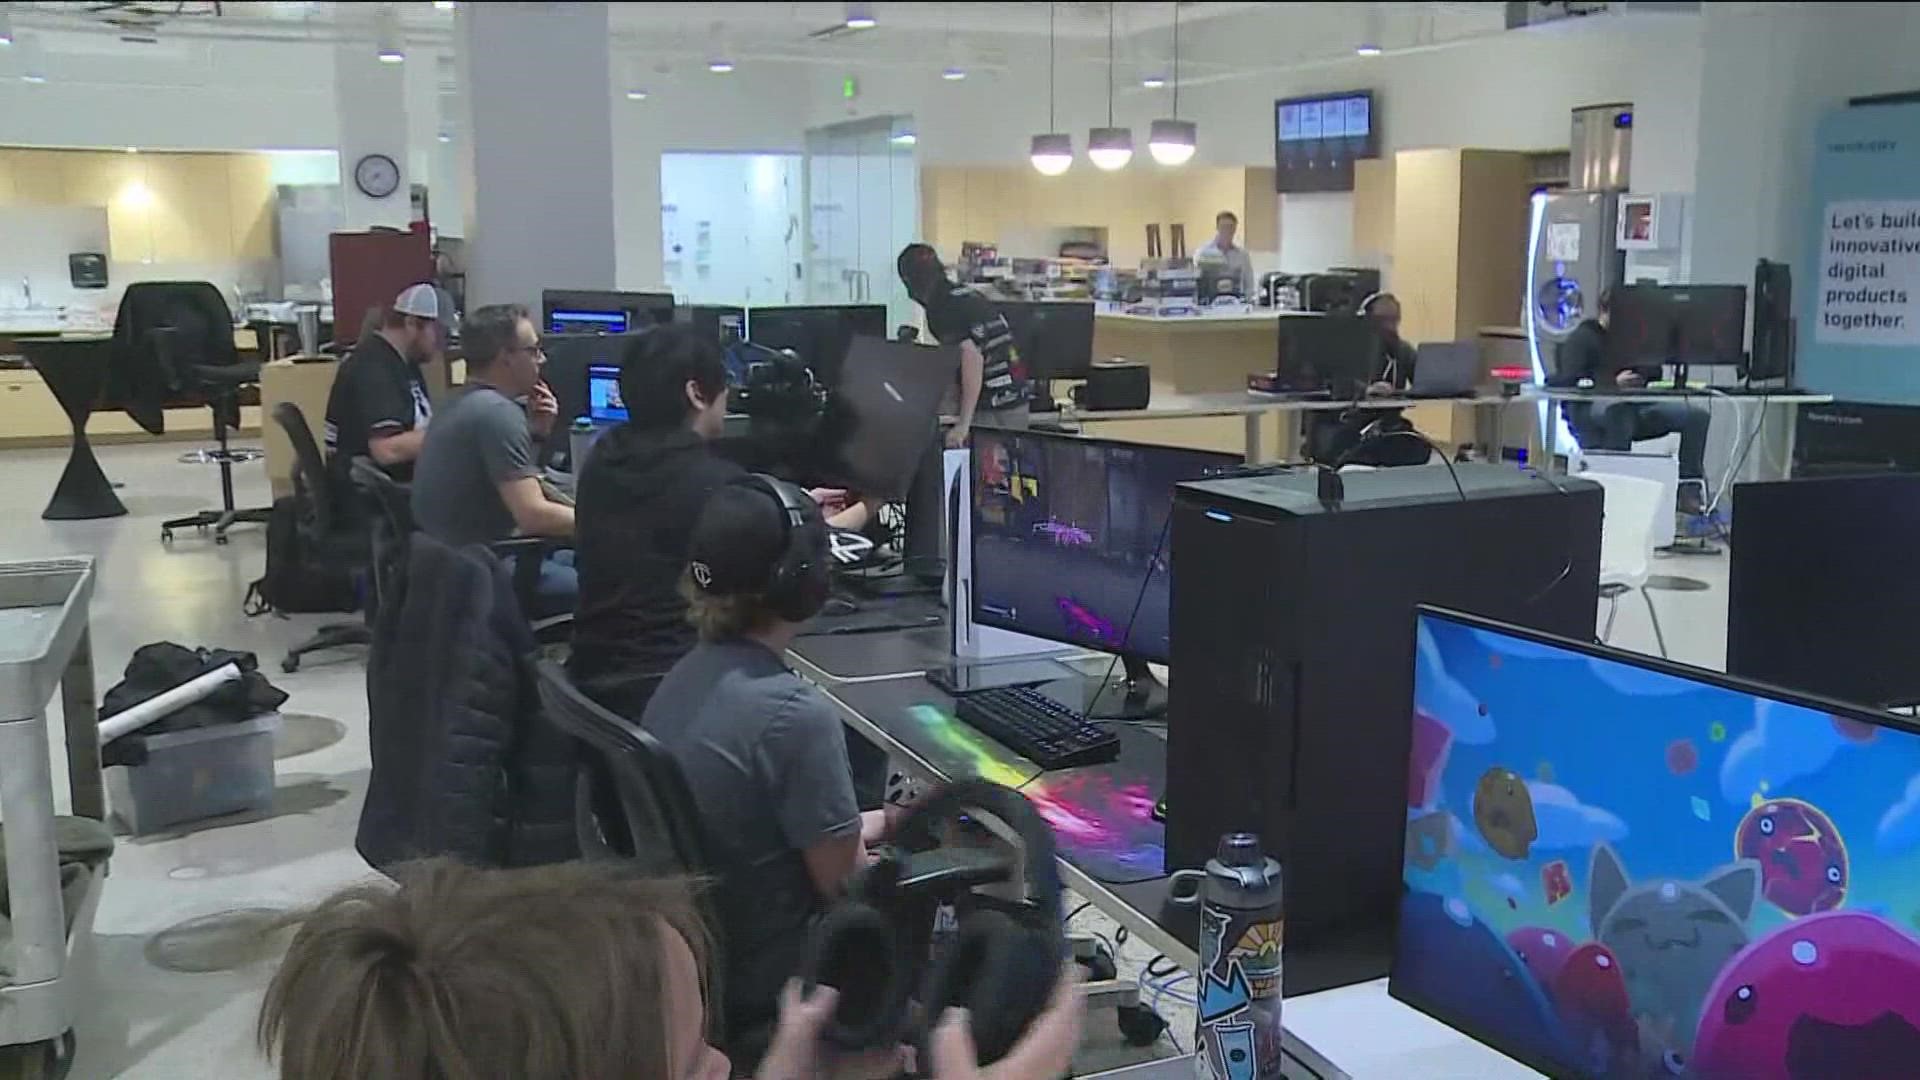 The event brings together gamers from around the world to raise money to benefit Children's Miracle Network hospitals.